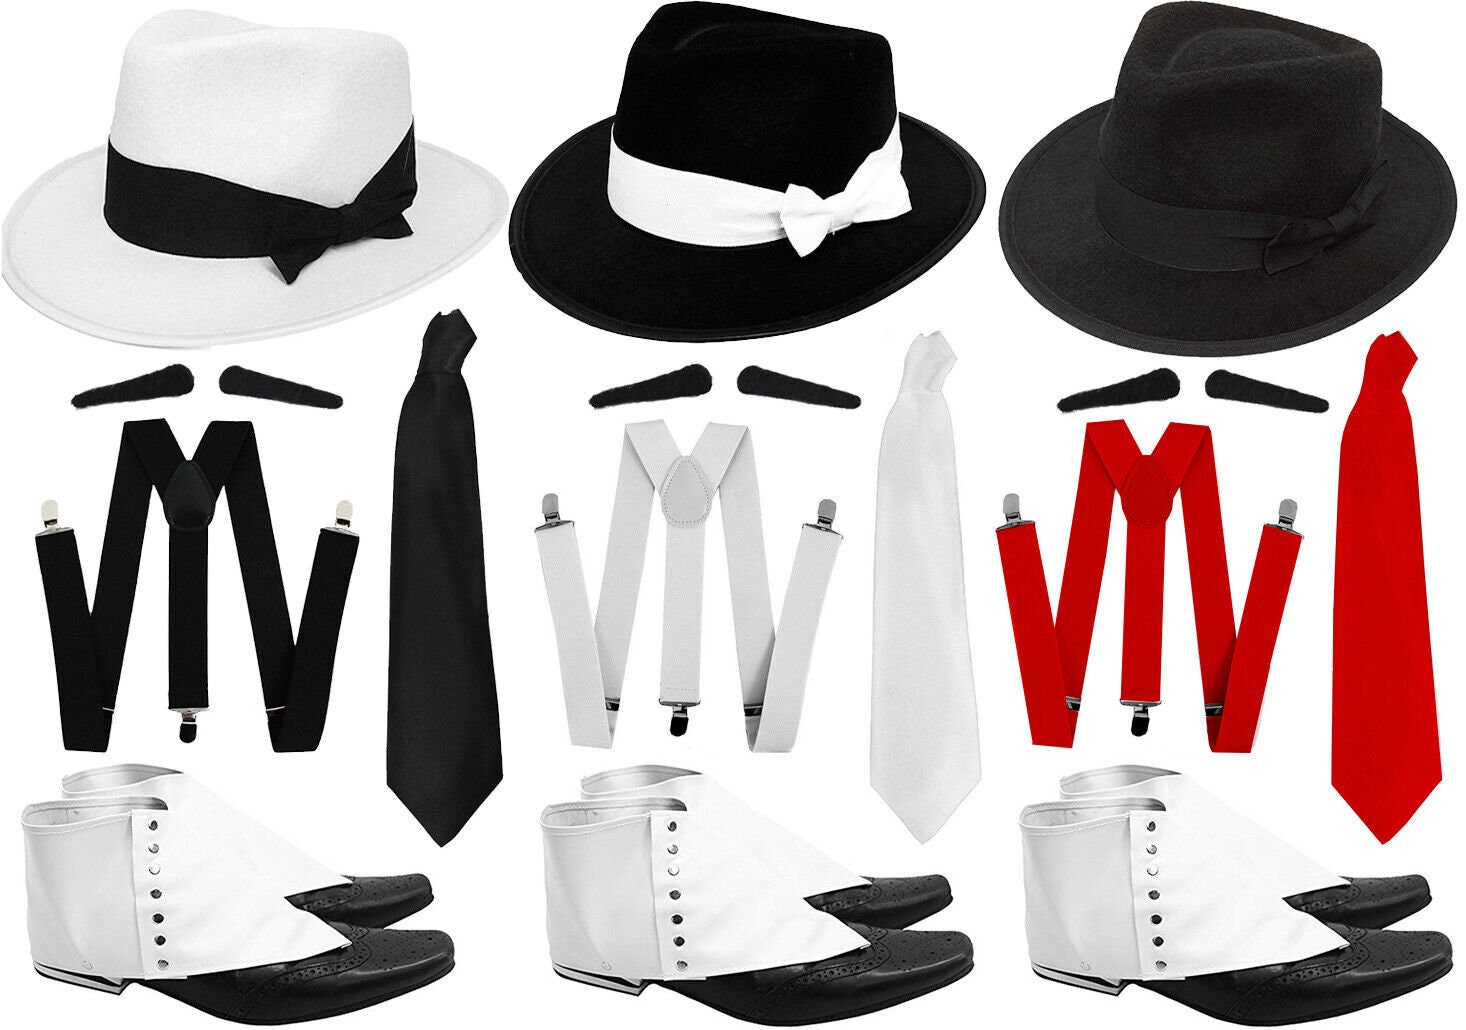 1920S Mens Great Gatsby Accessories Set Roaring 20 30s Retro Gangster  Costume Tie Hat Mafia Mobster